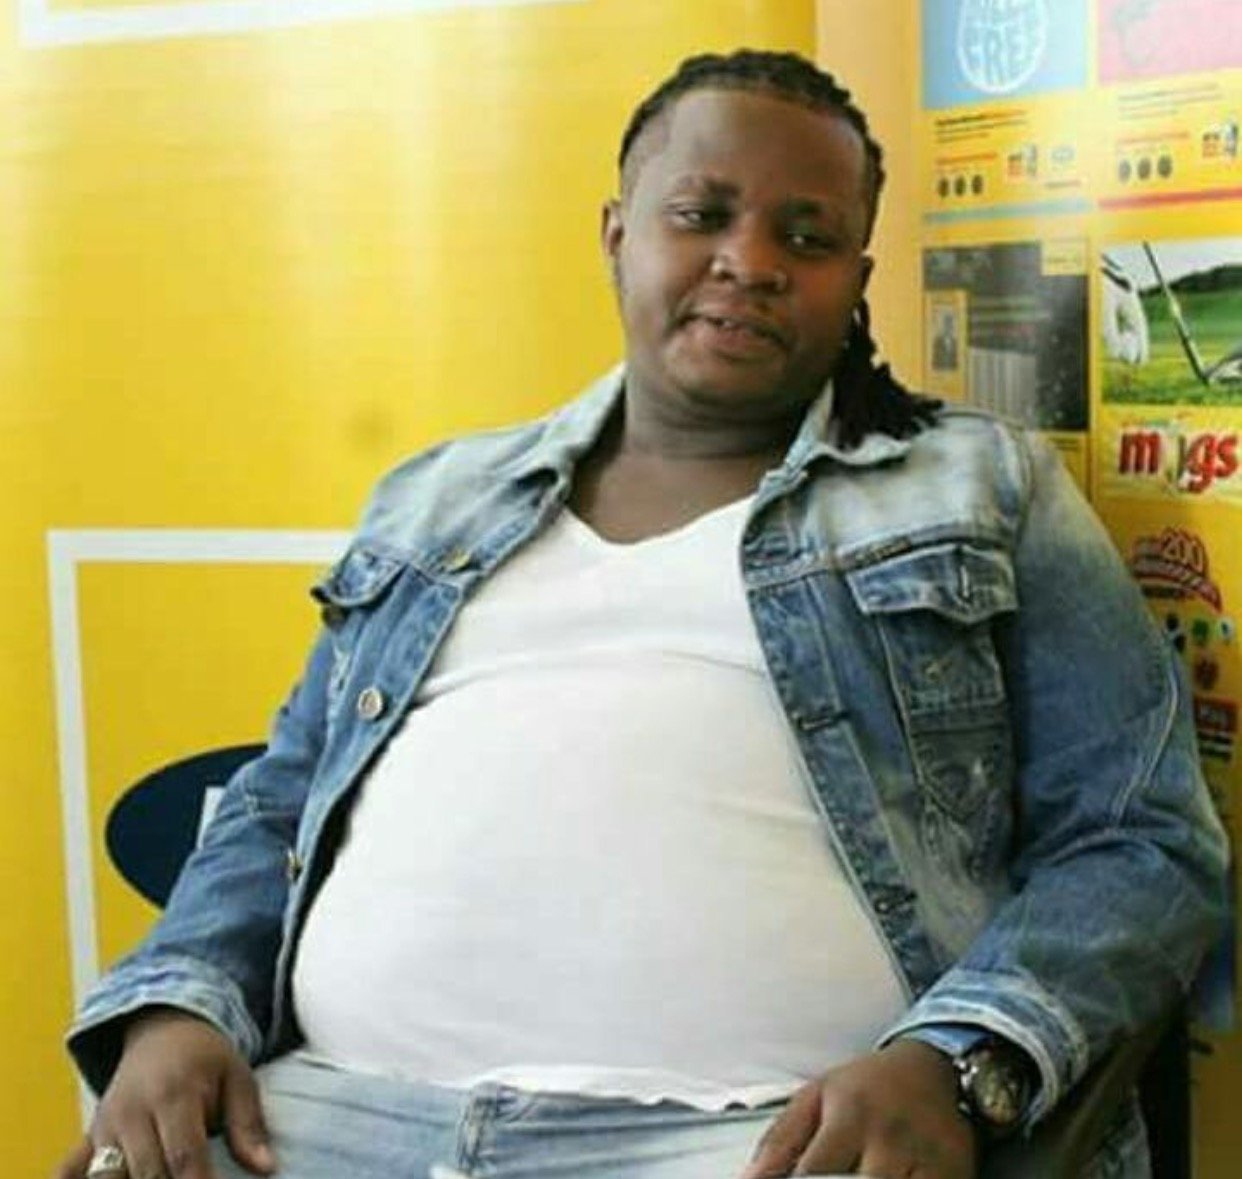 DK: I don’t have herpes. Fellow gospel singers used witchcraft to convince Kenyans i’m sick and i’m going to expose them